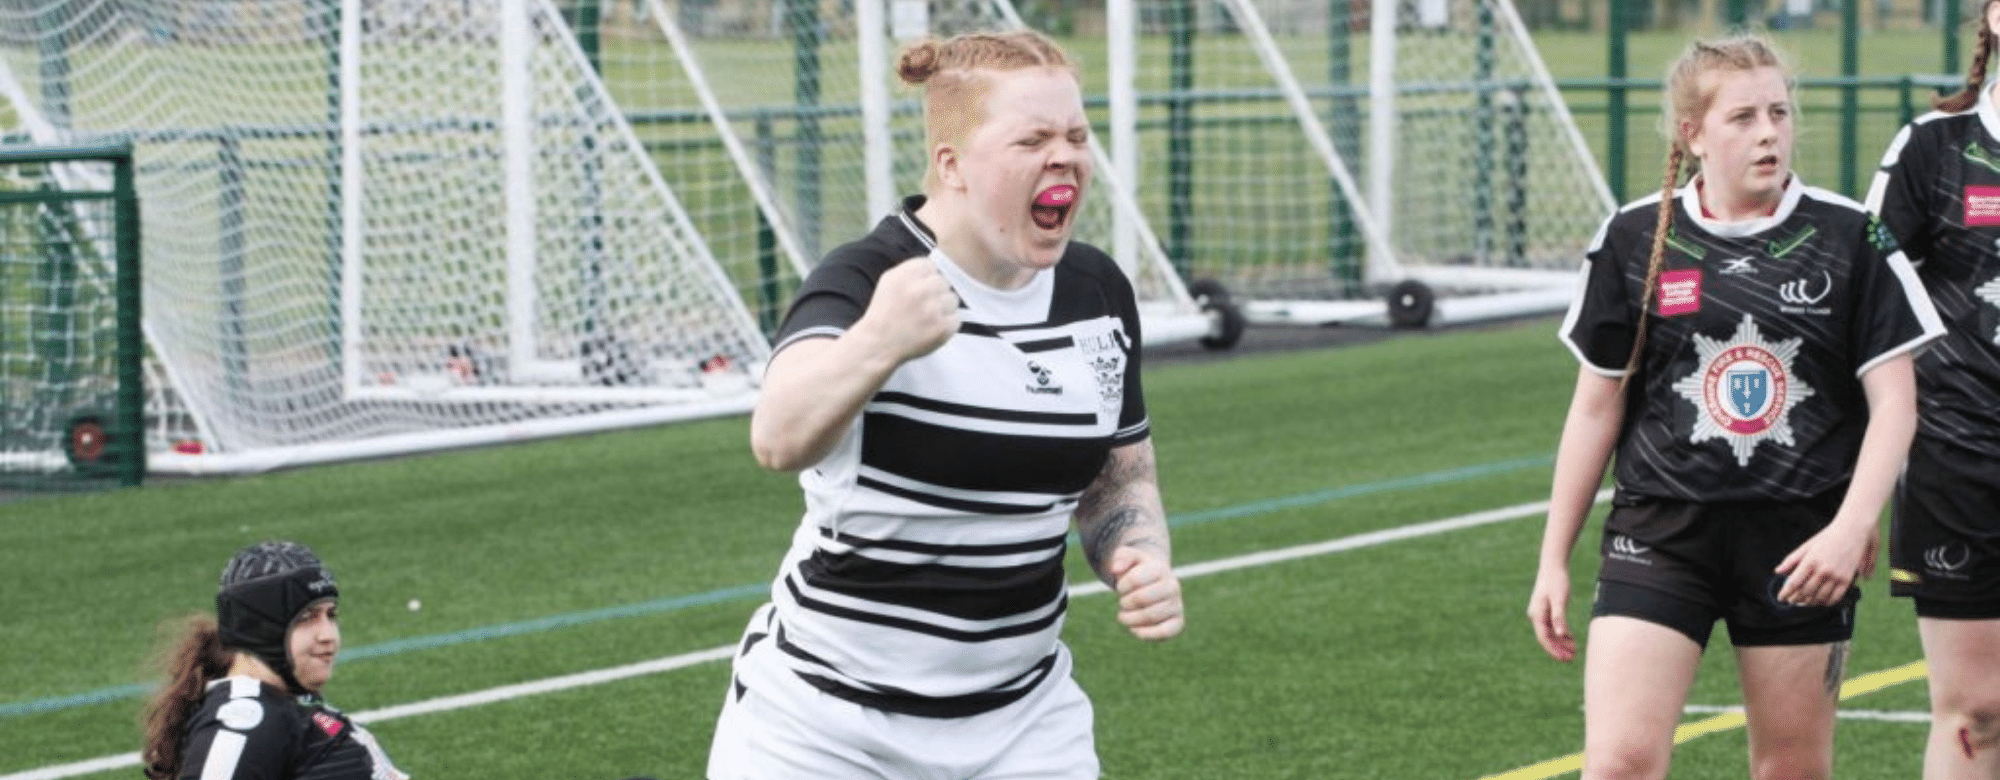 Hull Fc Girls Recruiting For 2022 With New Training Schedule Hull Fc News